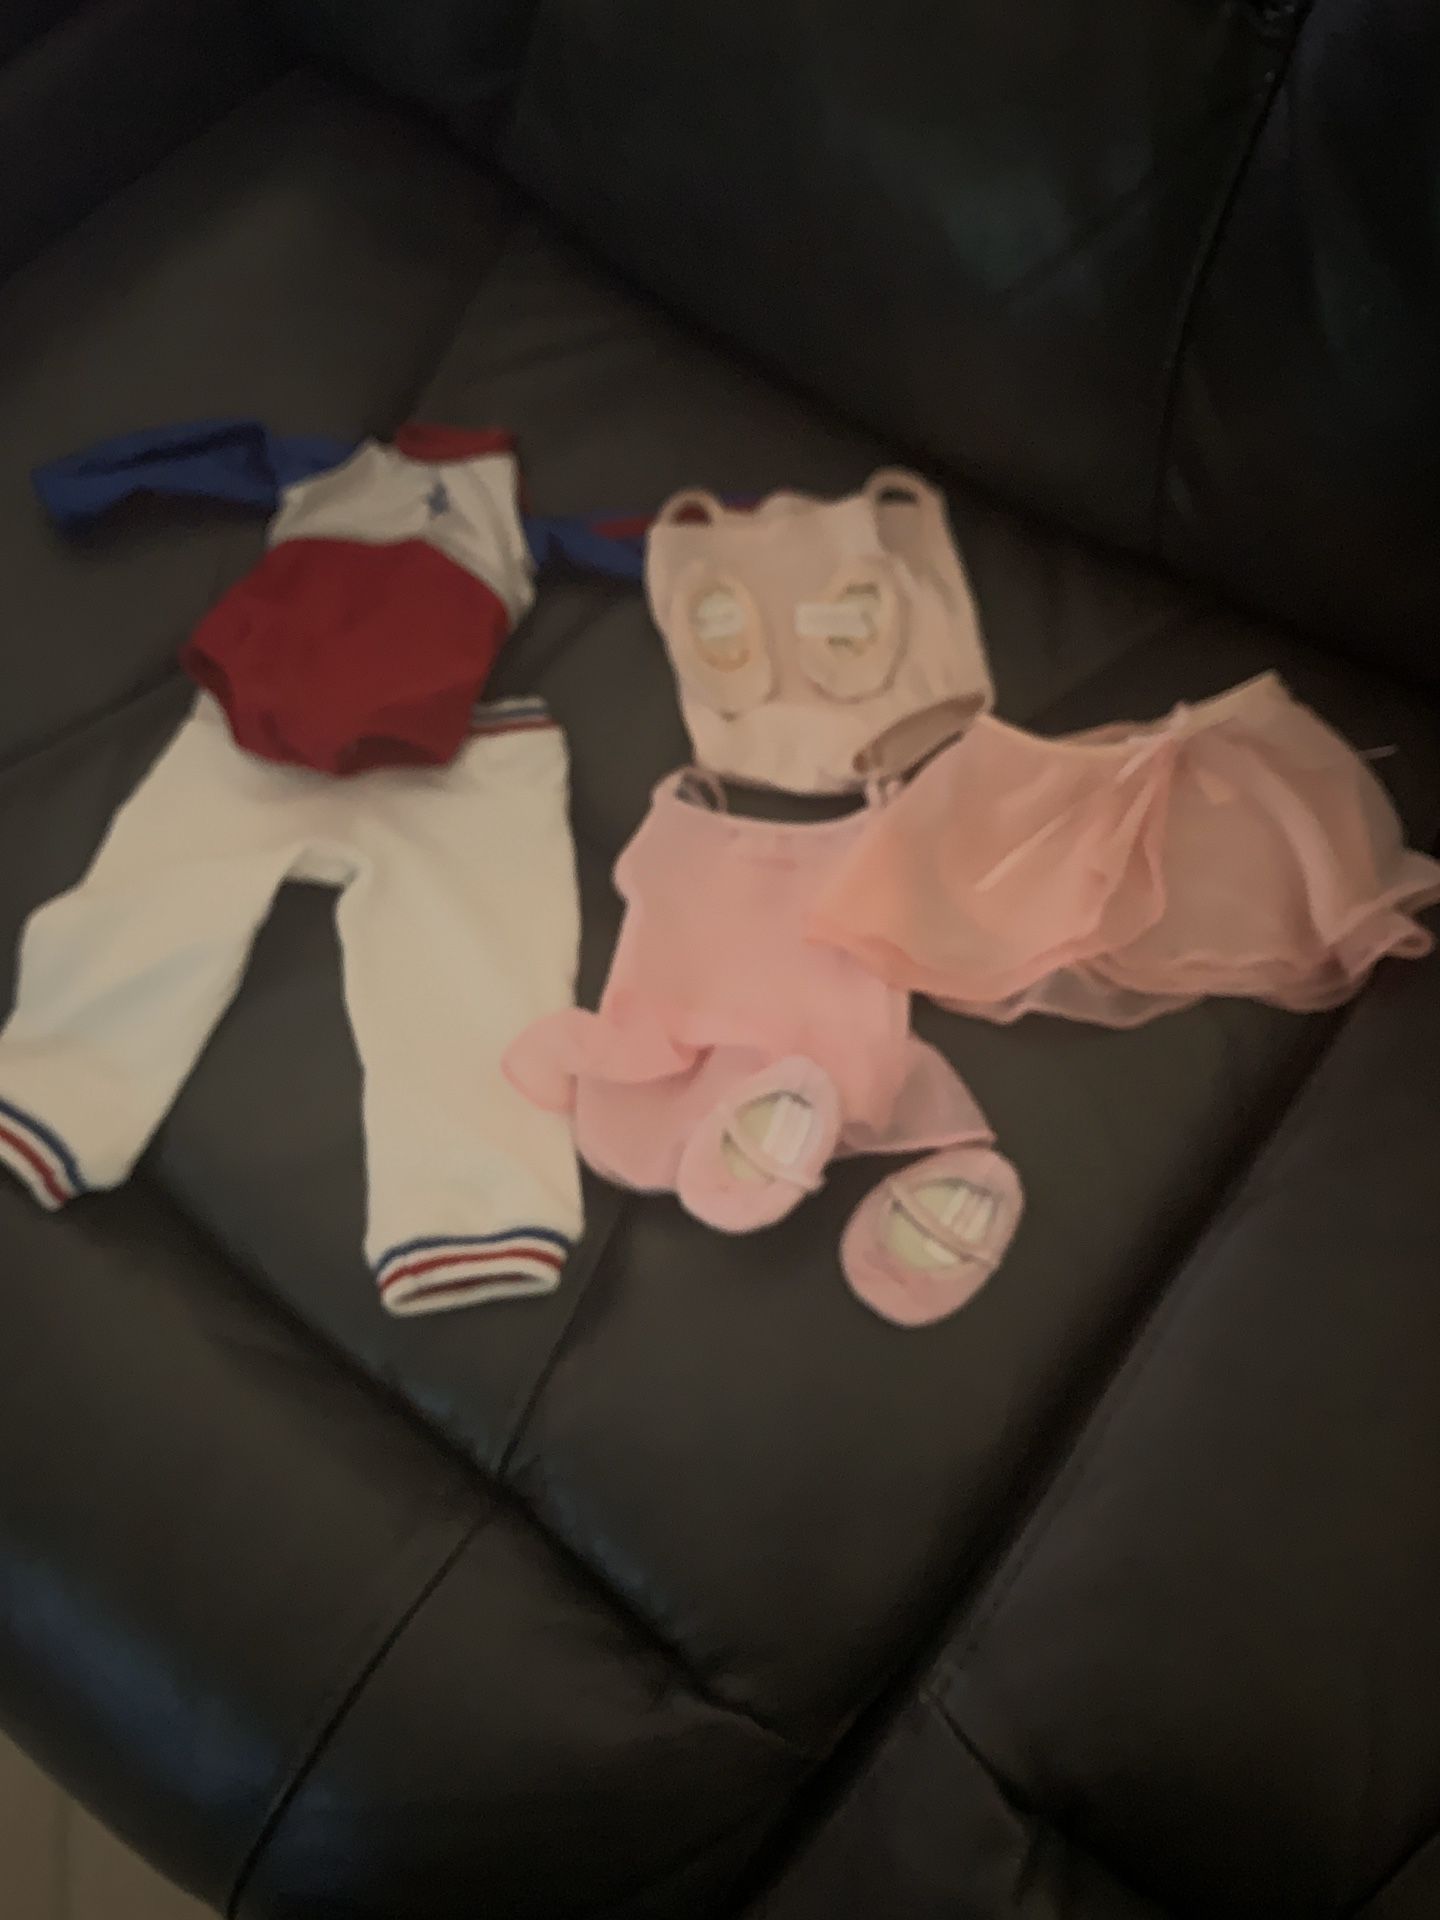 American girl doll outfits